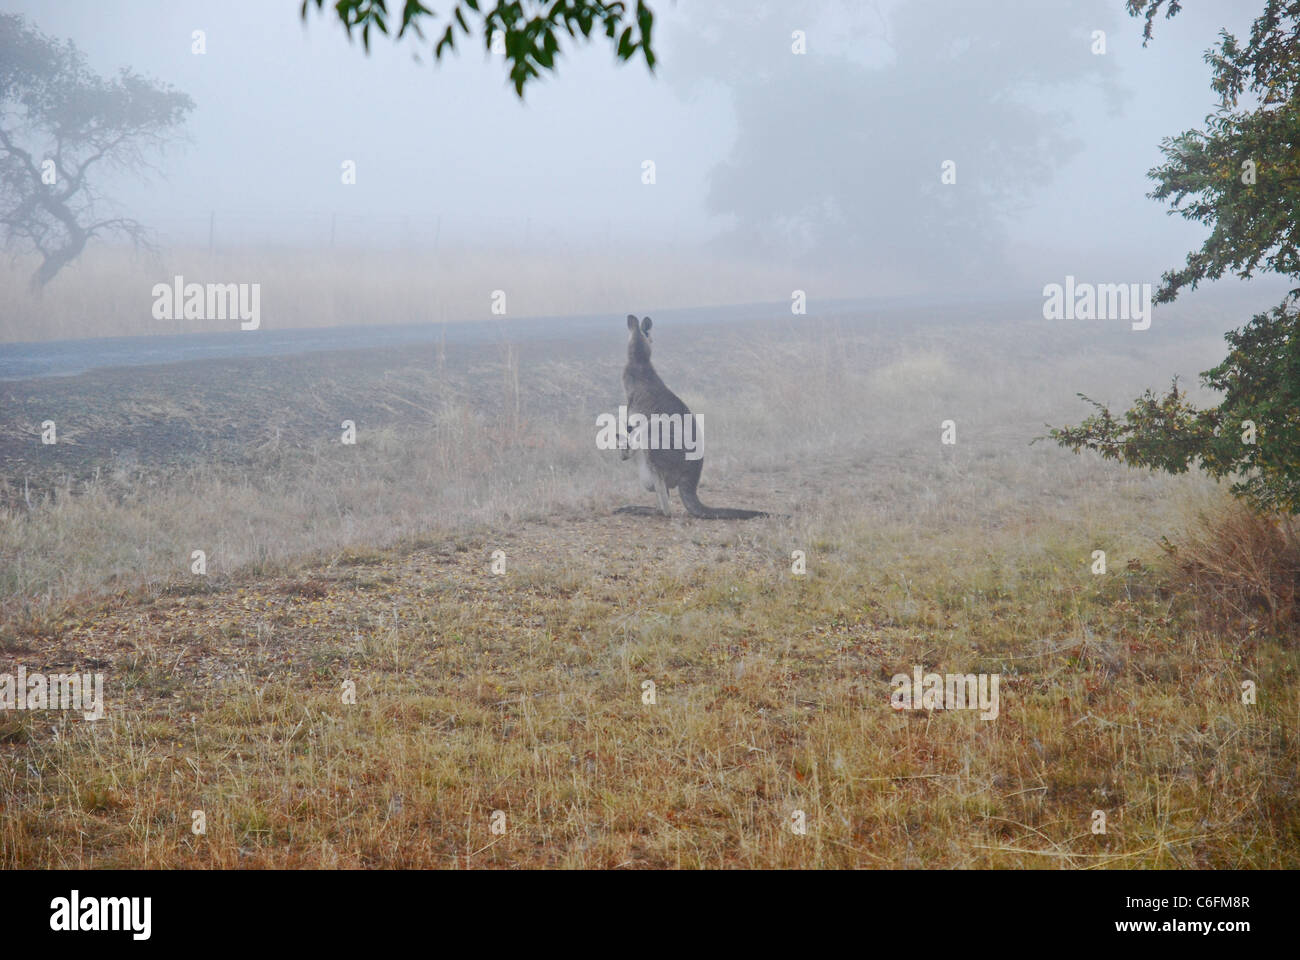 Kangaroo with joey about to cross road on foggy morning. Stock Photo